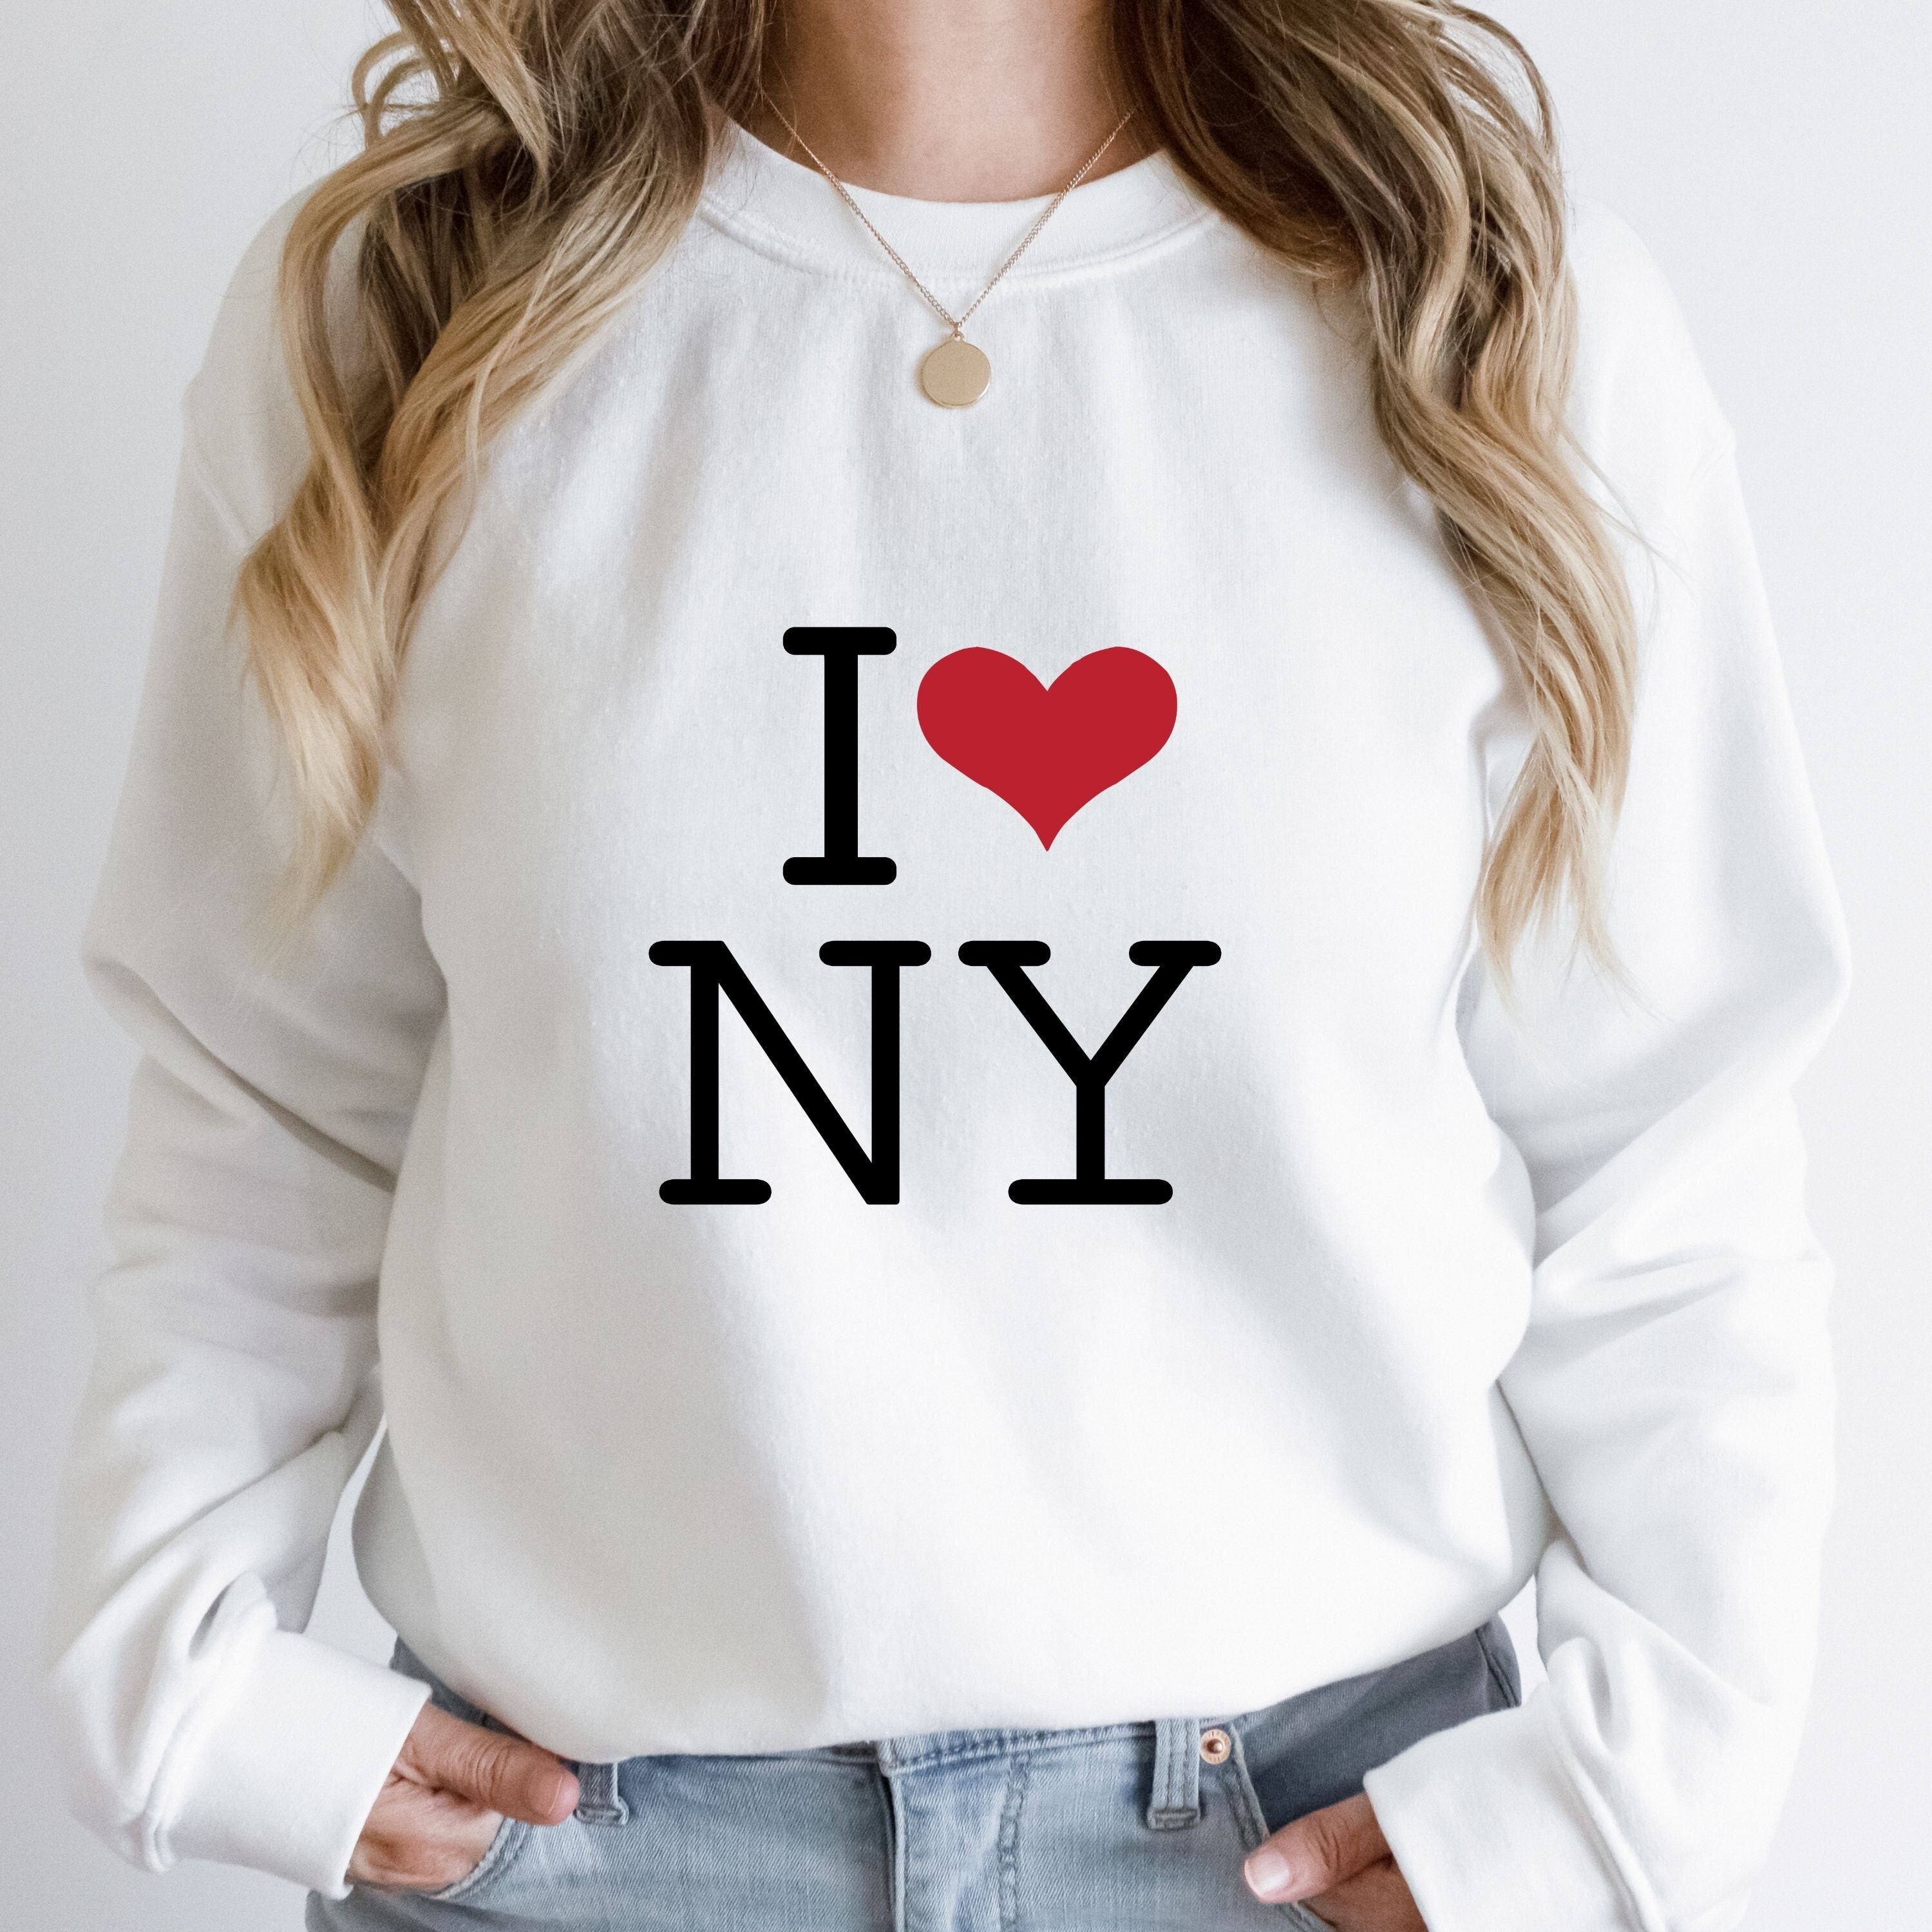 I Love New York Zip Up Hoodie Size Large Officially Licensed Product